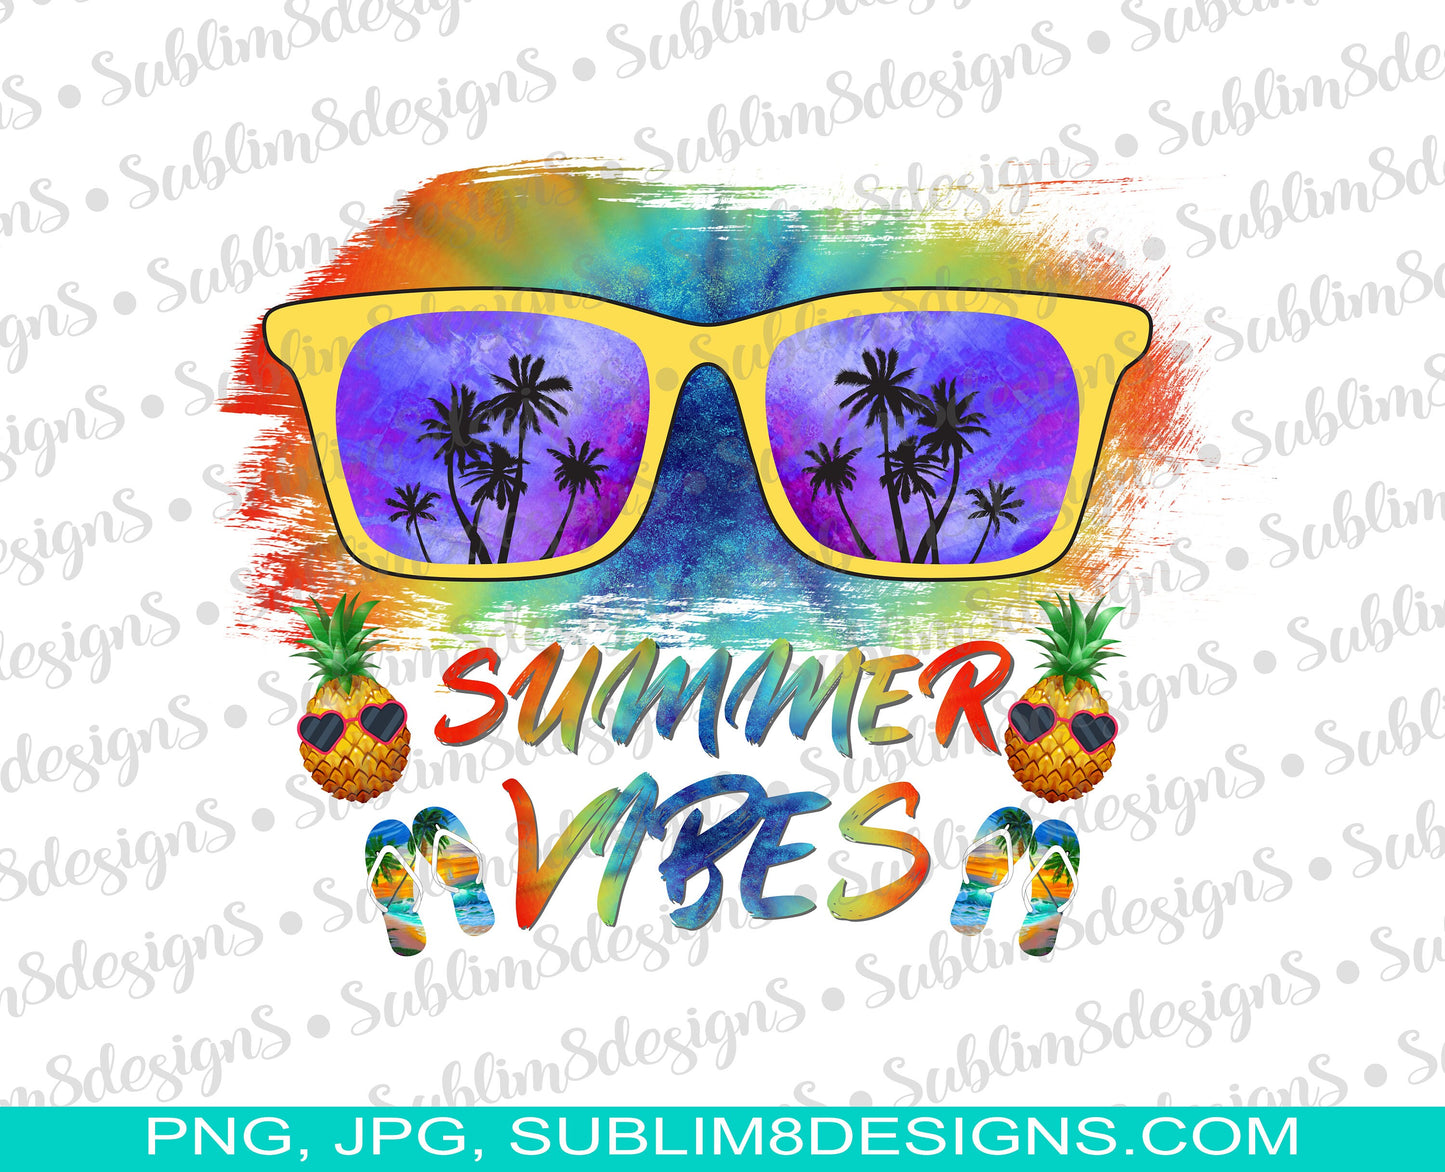 Summer Vibes PNG and JPG ONLY